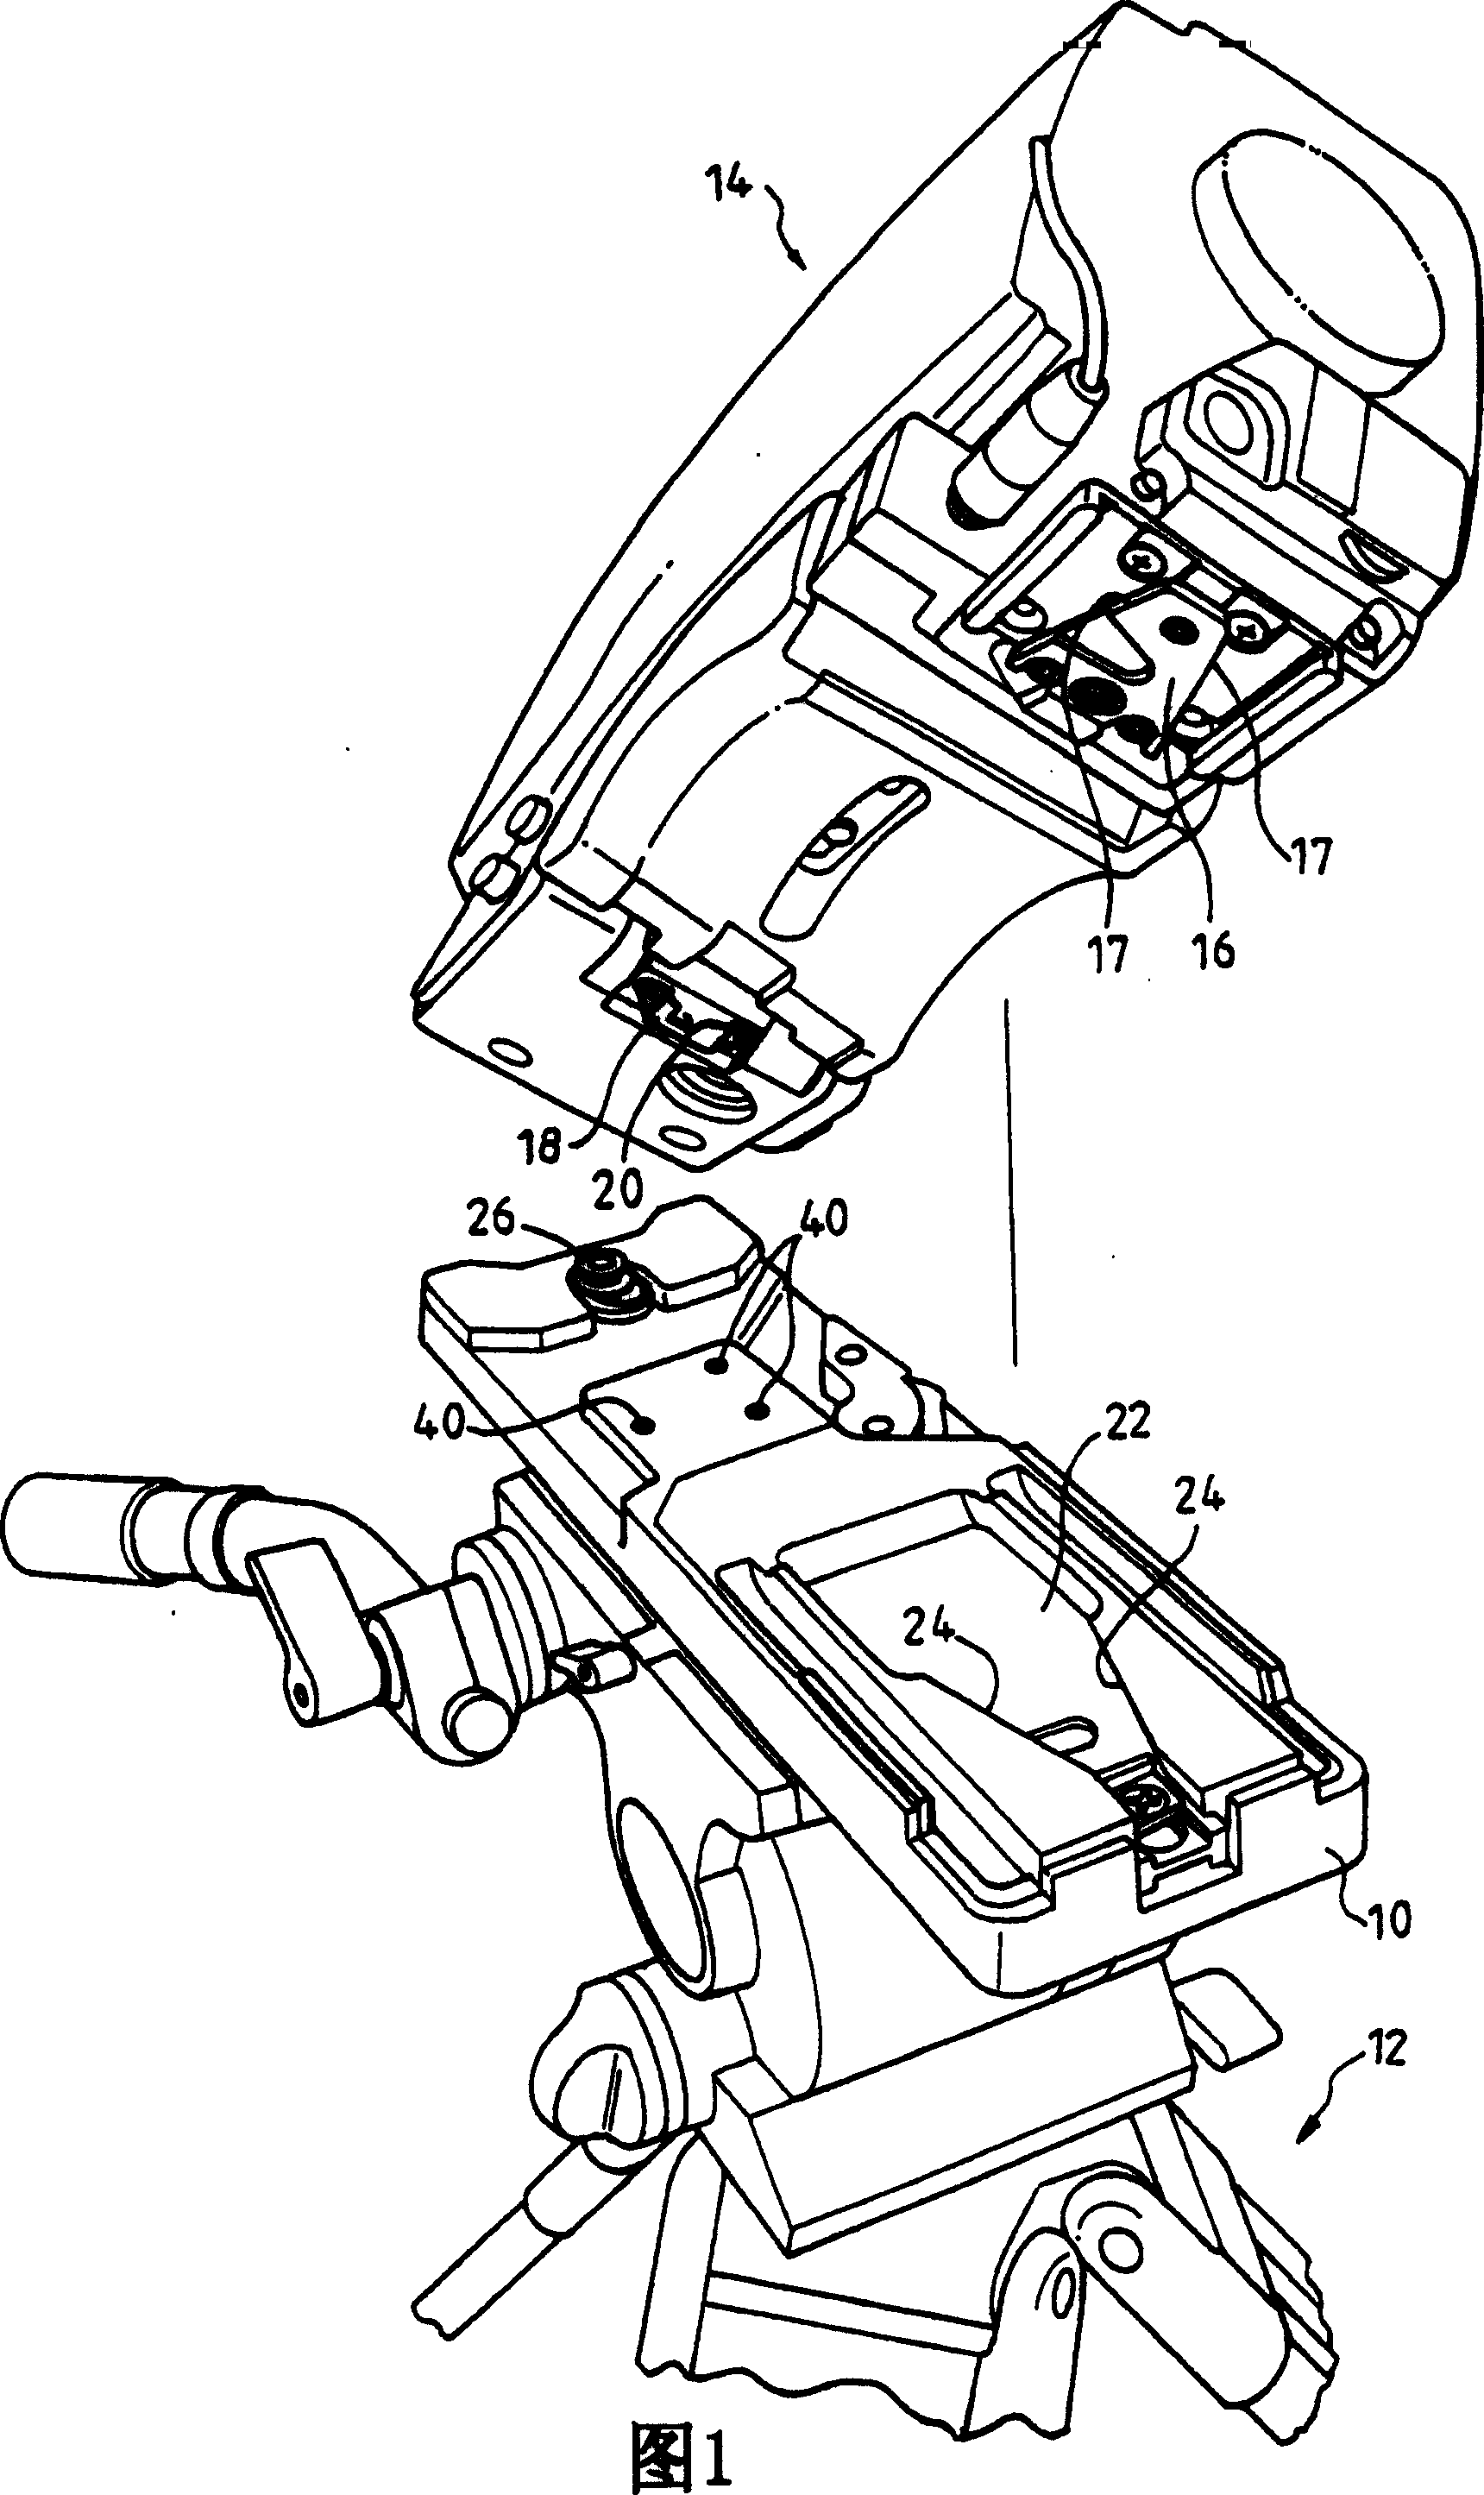 Fixture for video camera onto base board of tripod